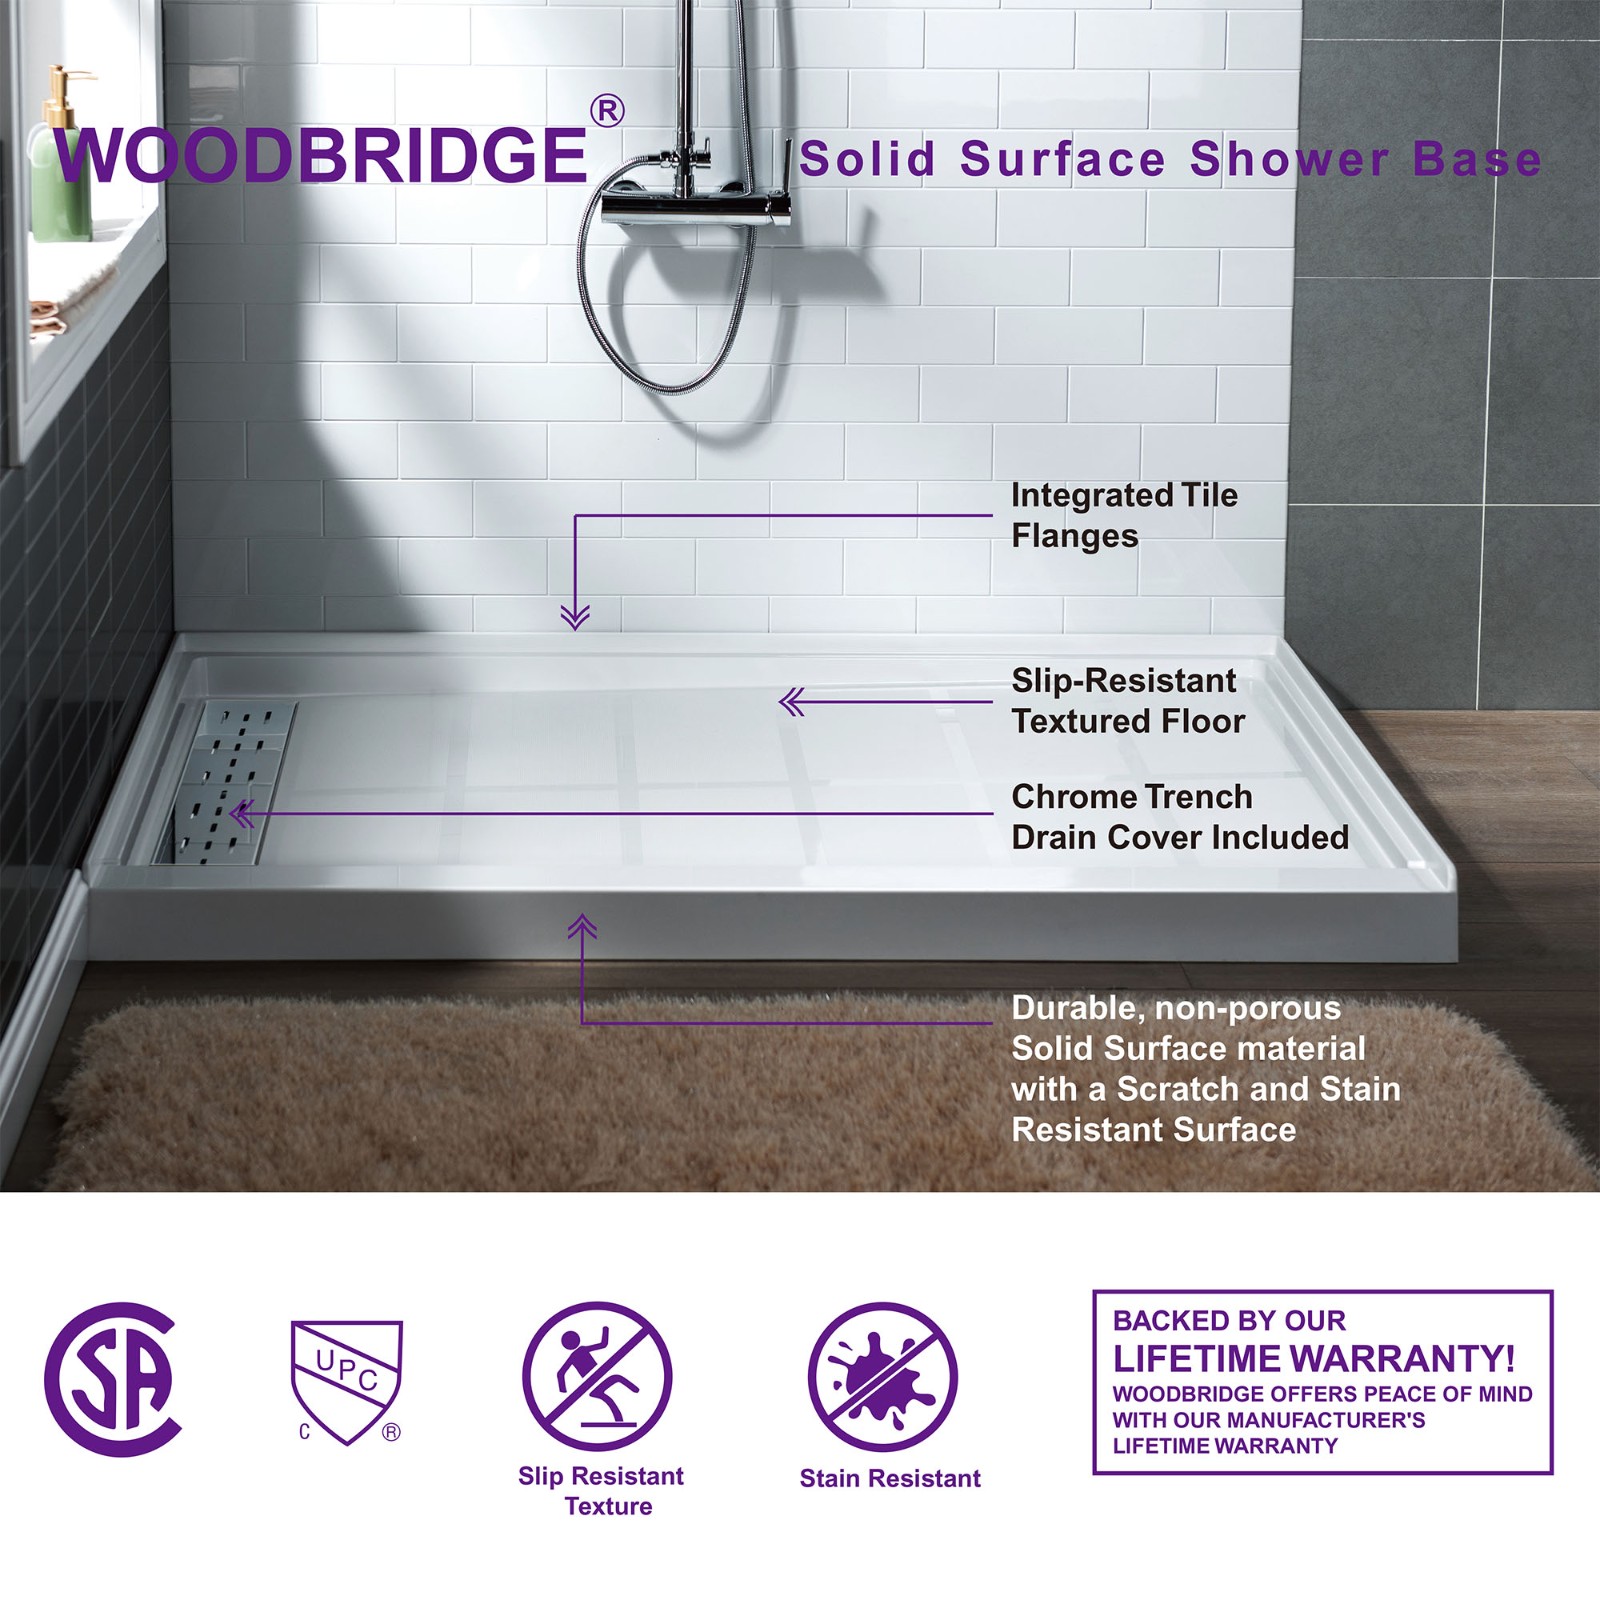  WOODBRIDGE SBR6032-1000L-CH SolidSurface Shower Base with Recessed Trench Side Including  Chrome Linear Cover, 60